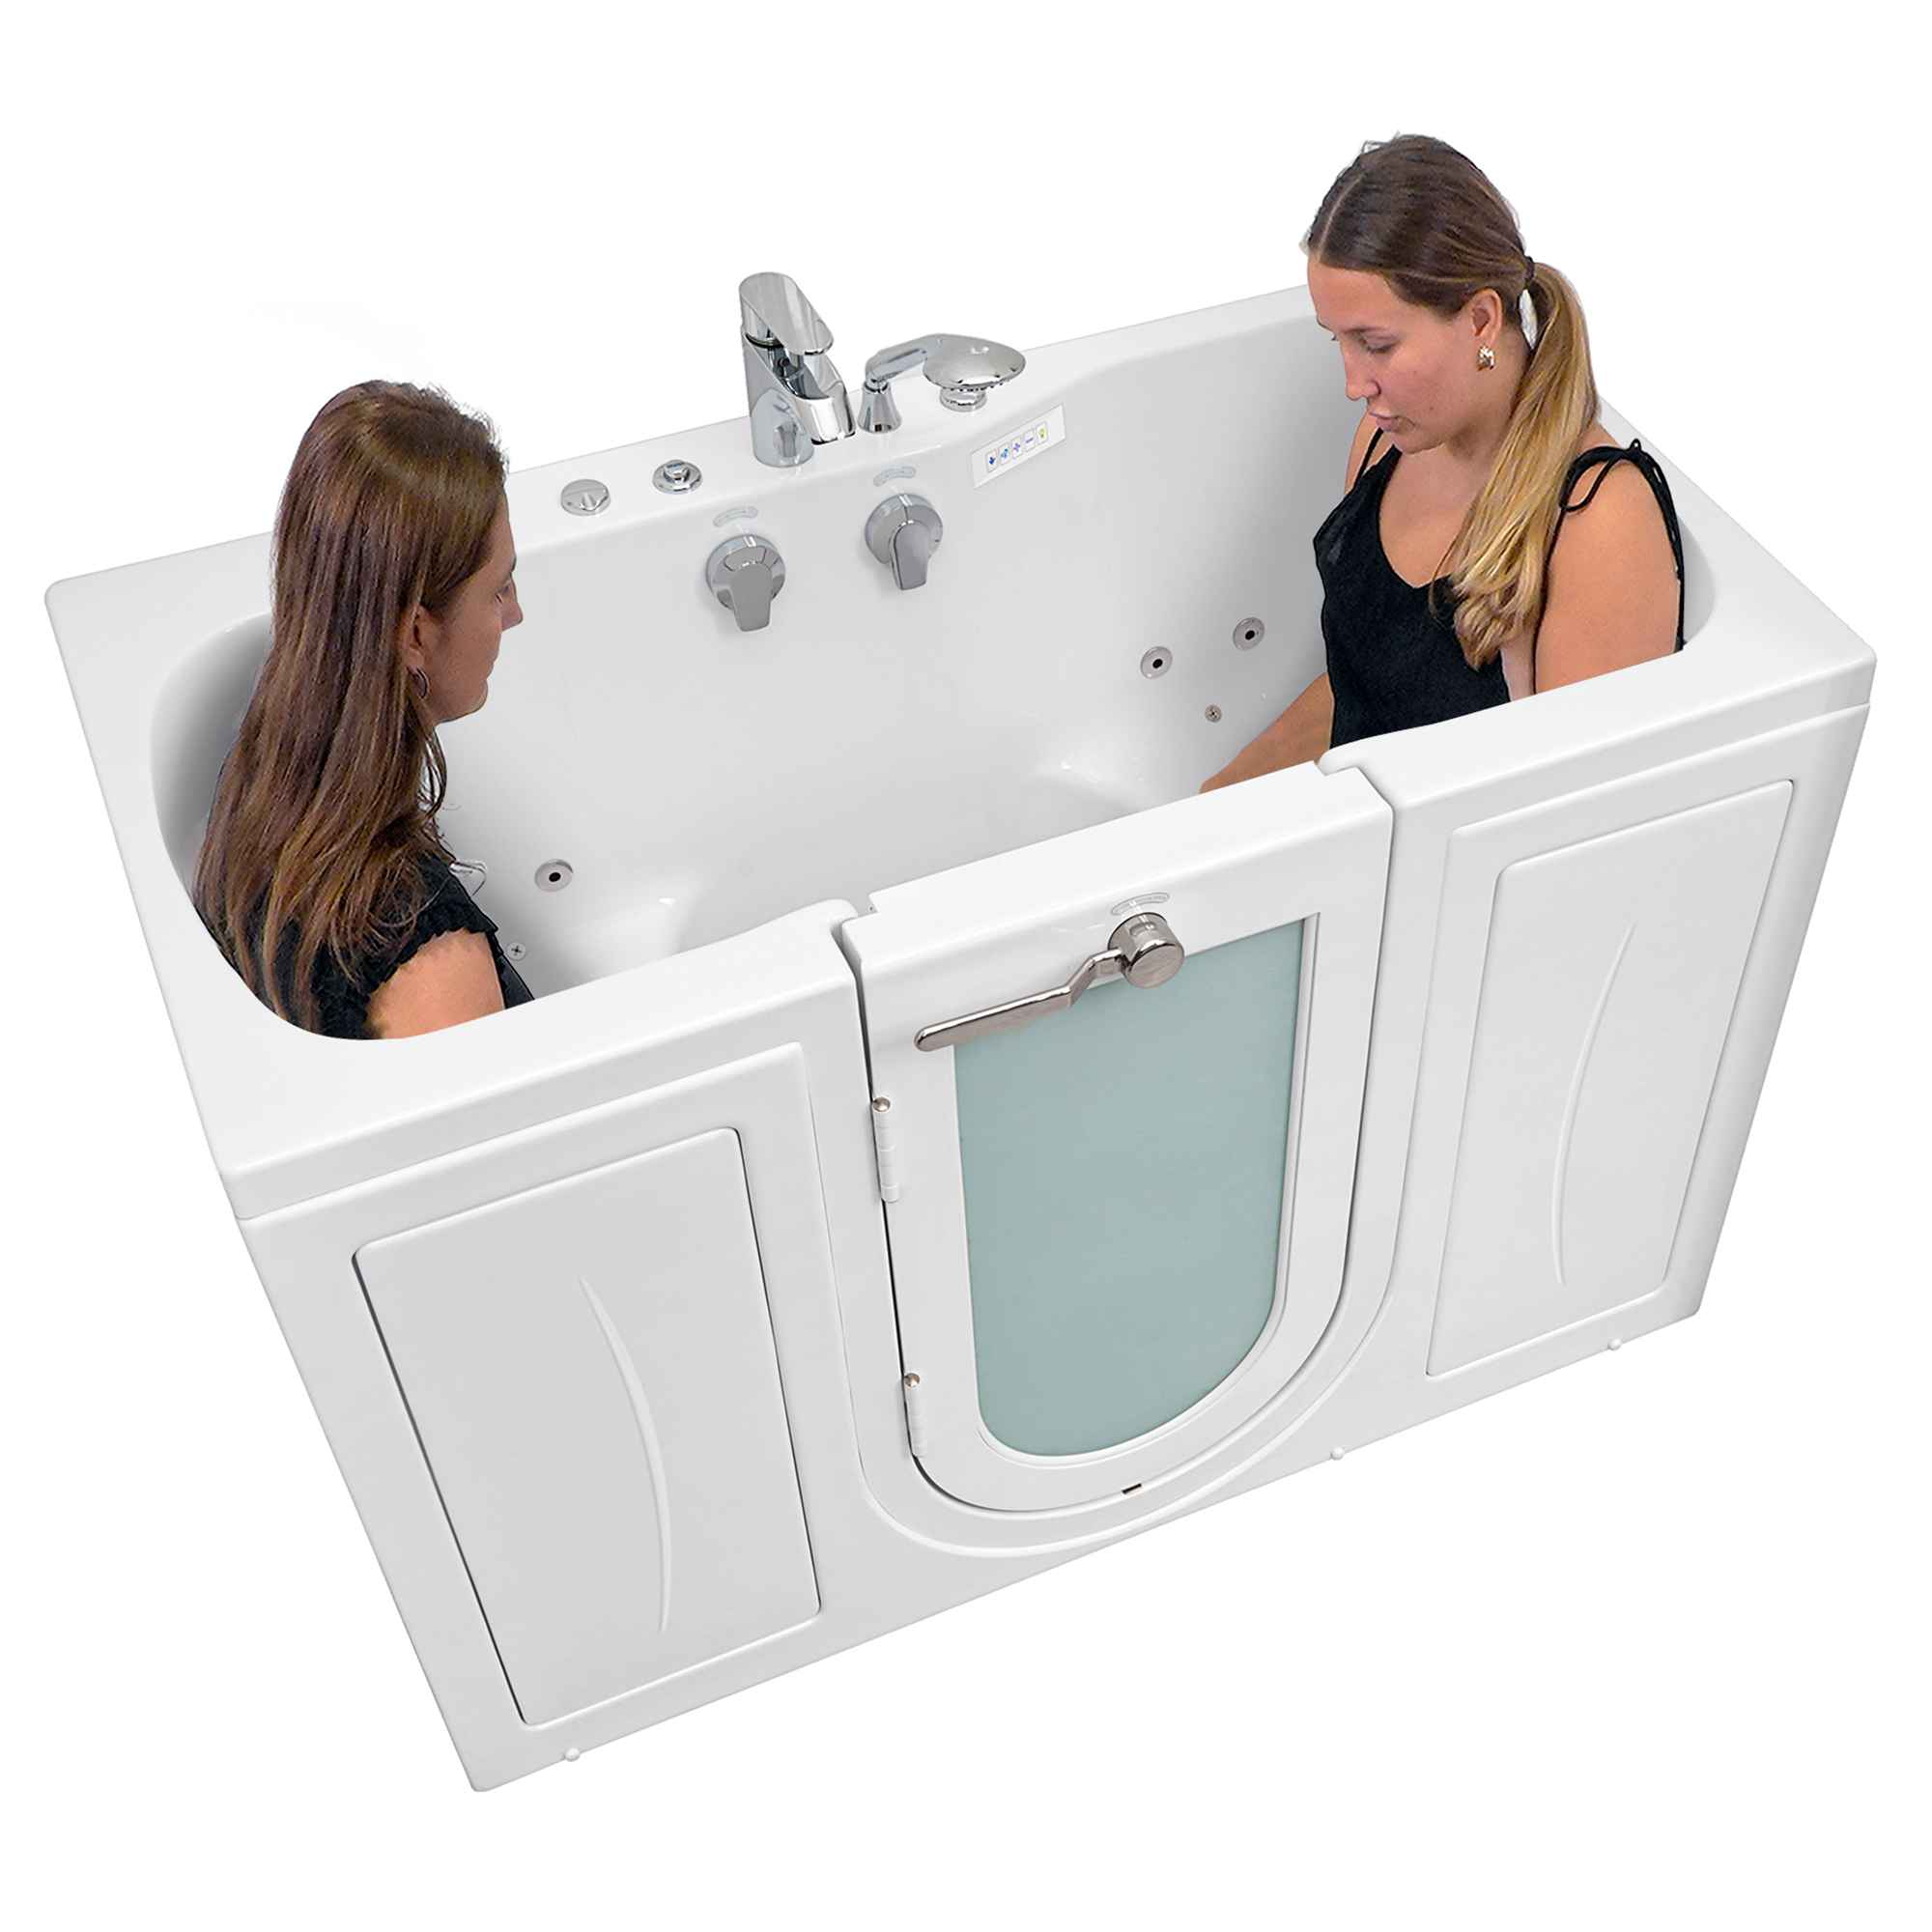 Ella Tub4Two 32"x60" Hydro + Air Massage w/ Independent Foot Massage Acrylic Two Seat Walk in Tub, Outswing Door, 2 Piece Fast Fill Faucet, 2" Dual Drains Bath Tub Ella's Bubbles   